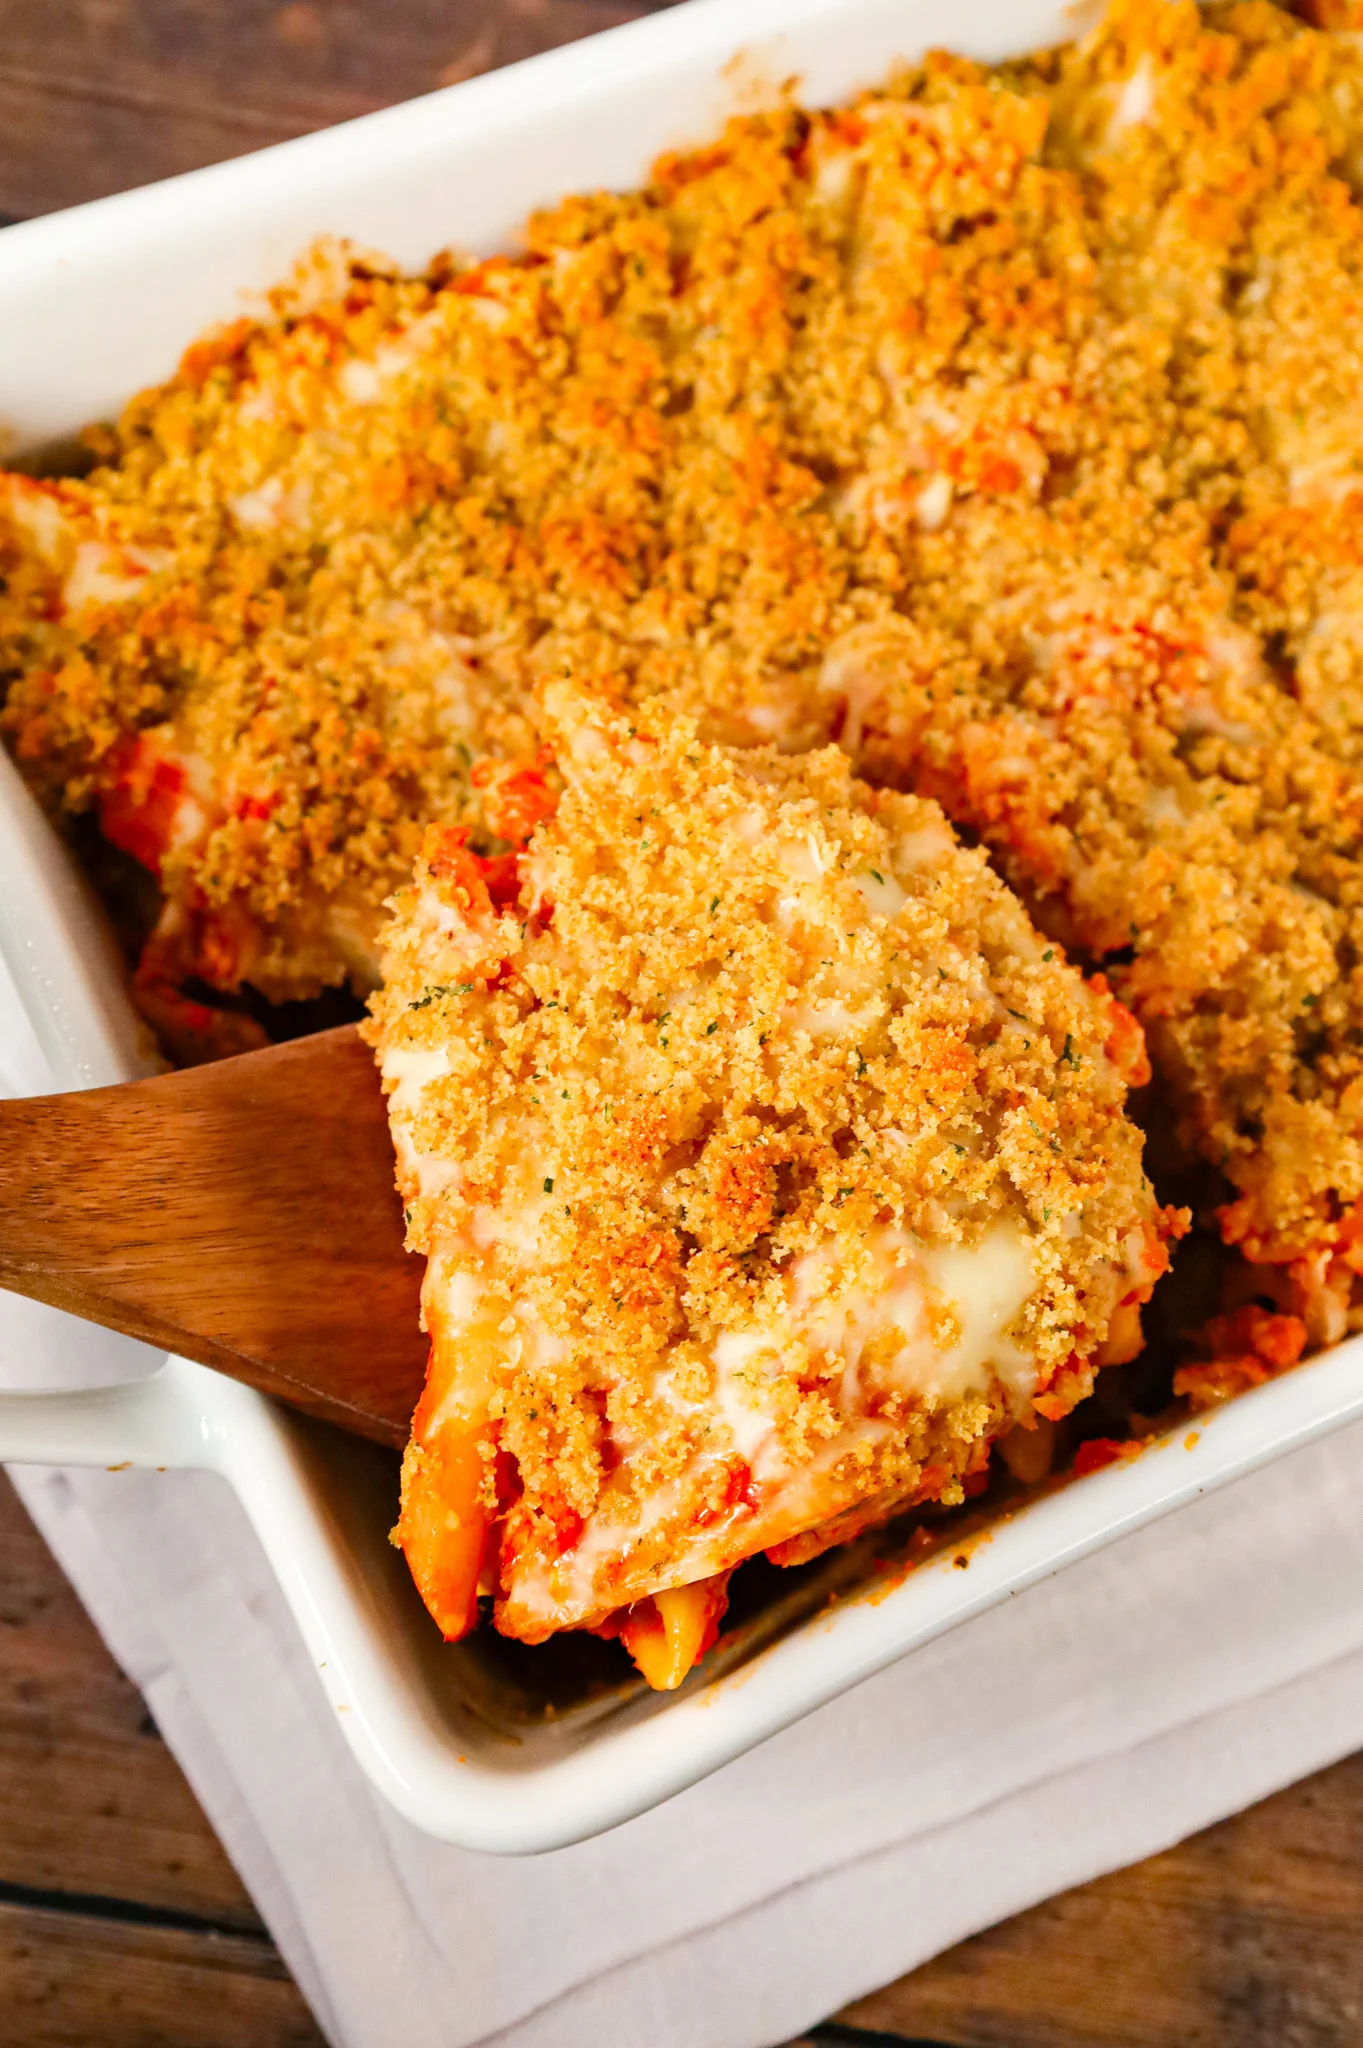 Chicken Parmesan Pasta is an easy baked pasta recipe loaded with shredded chicken, marinara sauce, mozzarella, parmesan cheese and topped with Italian seasoned bread crumbs.